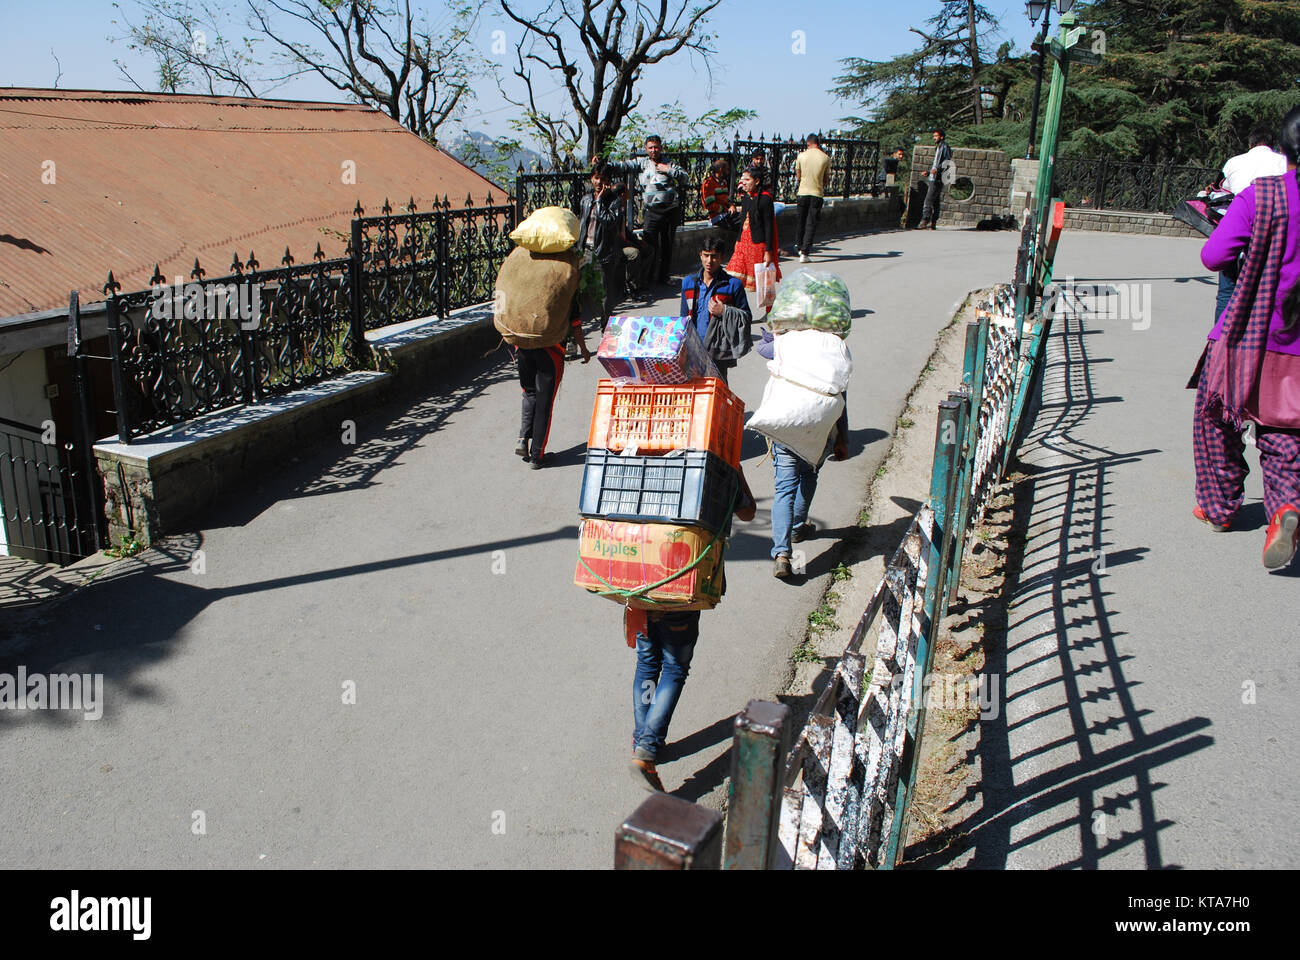 People working in Shimla. Two men carrying heavy loads on their backs through the streets of Shimla. Stock Photo